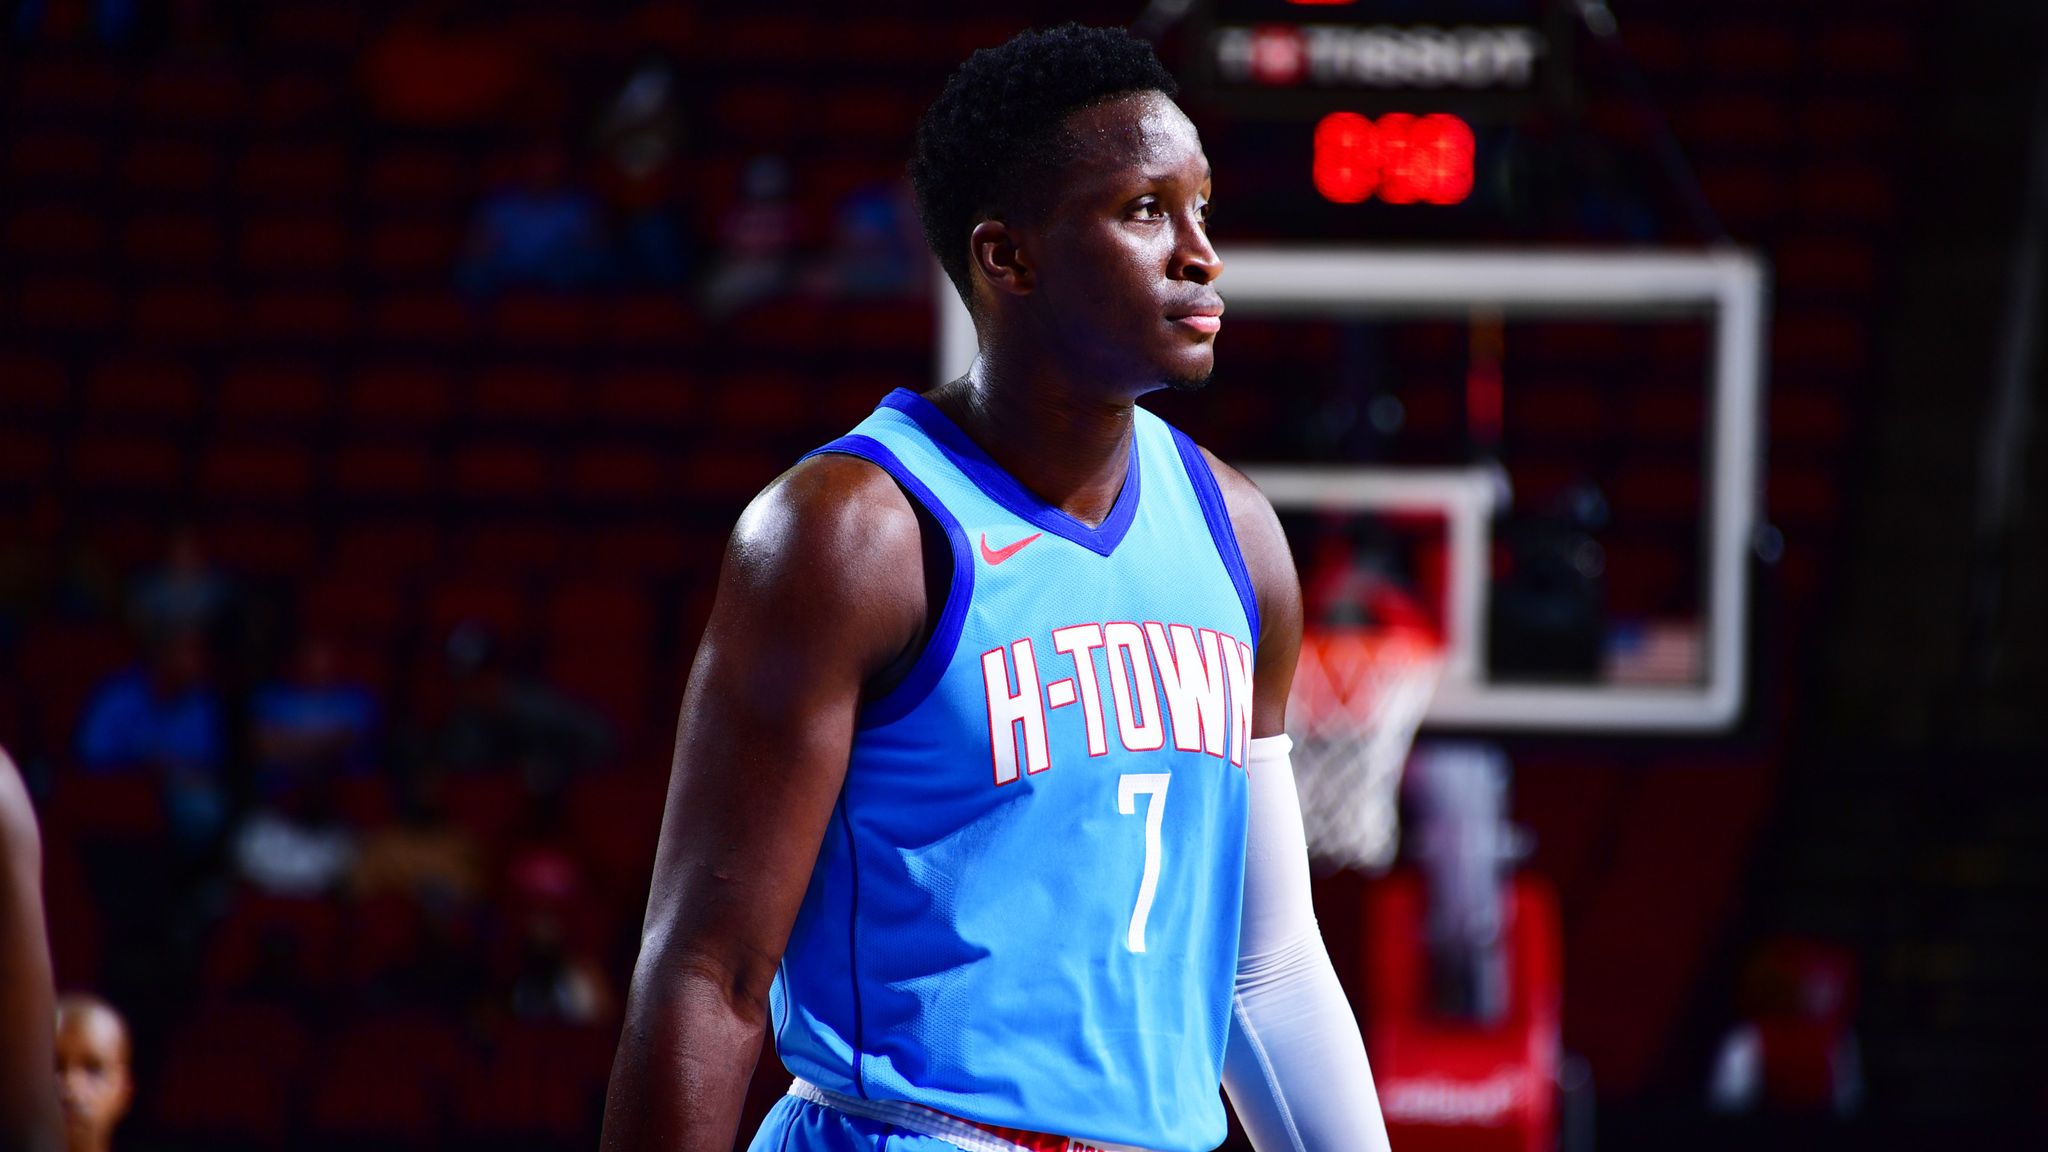 Report: Victor Oladipo traded to Houston as part of NBA megadeal